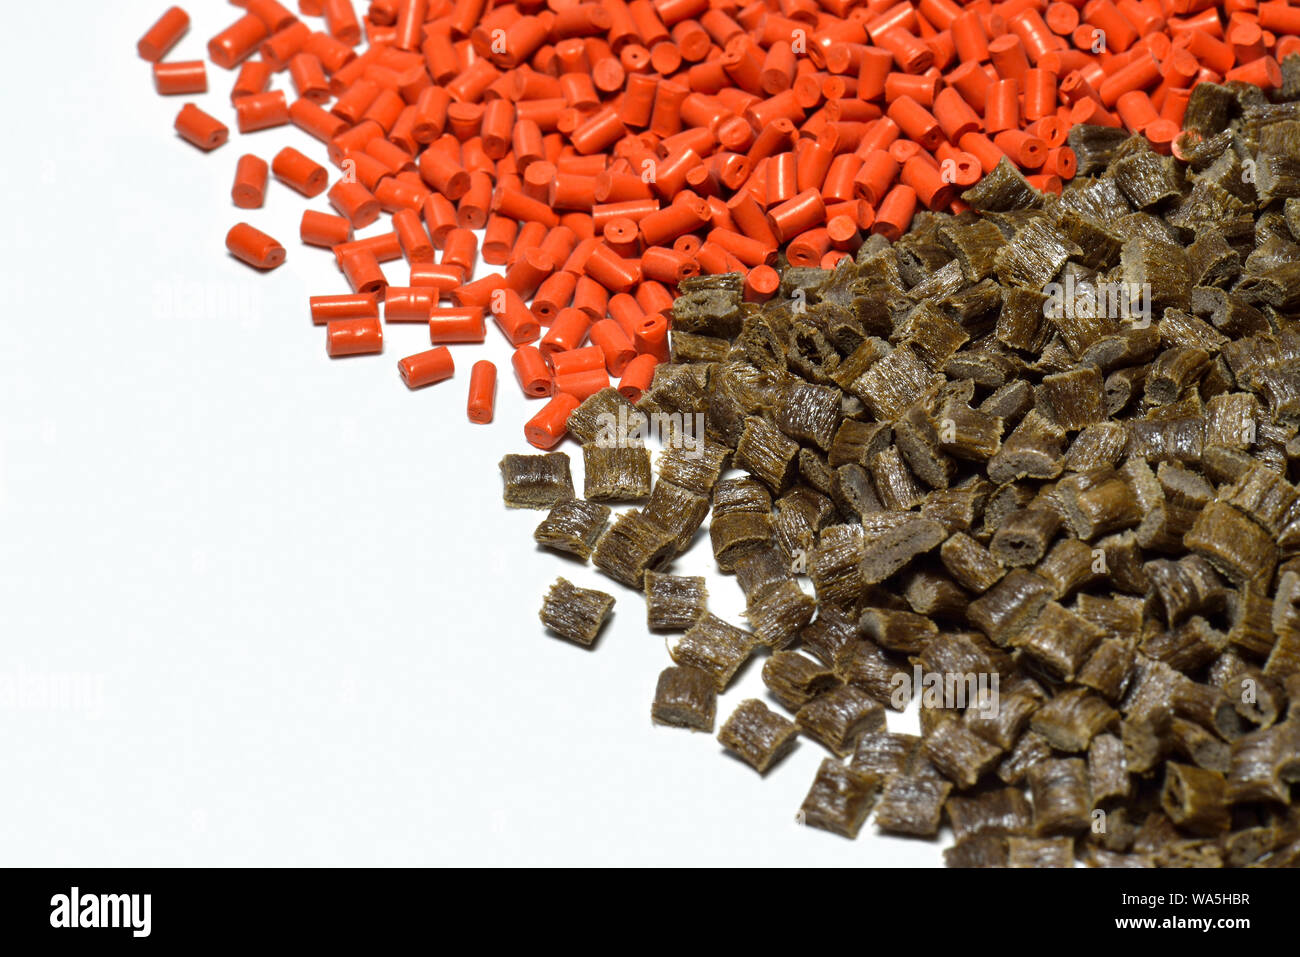 orange and brown polymer pellets for injection moulding process Stock Photo